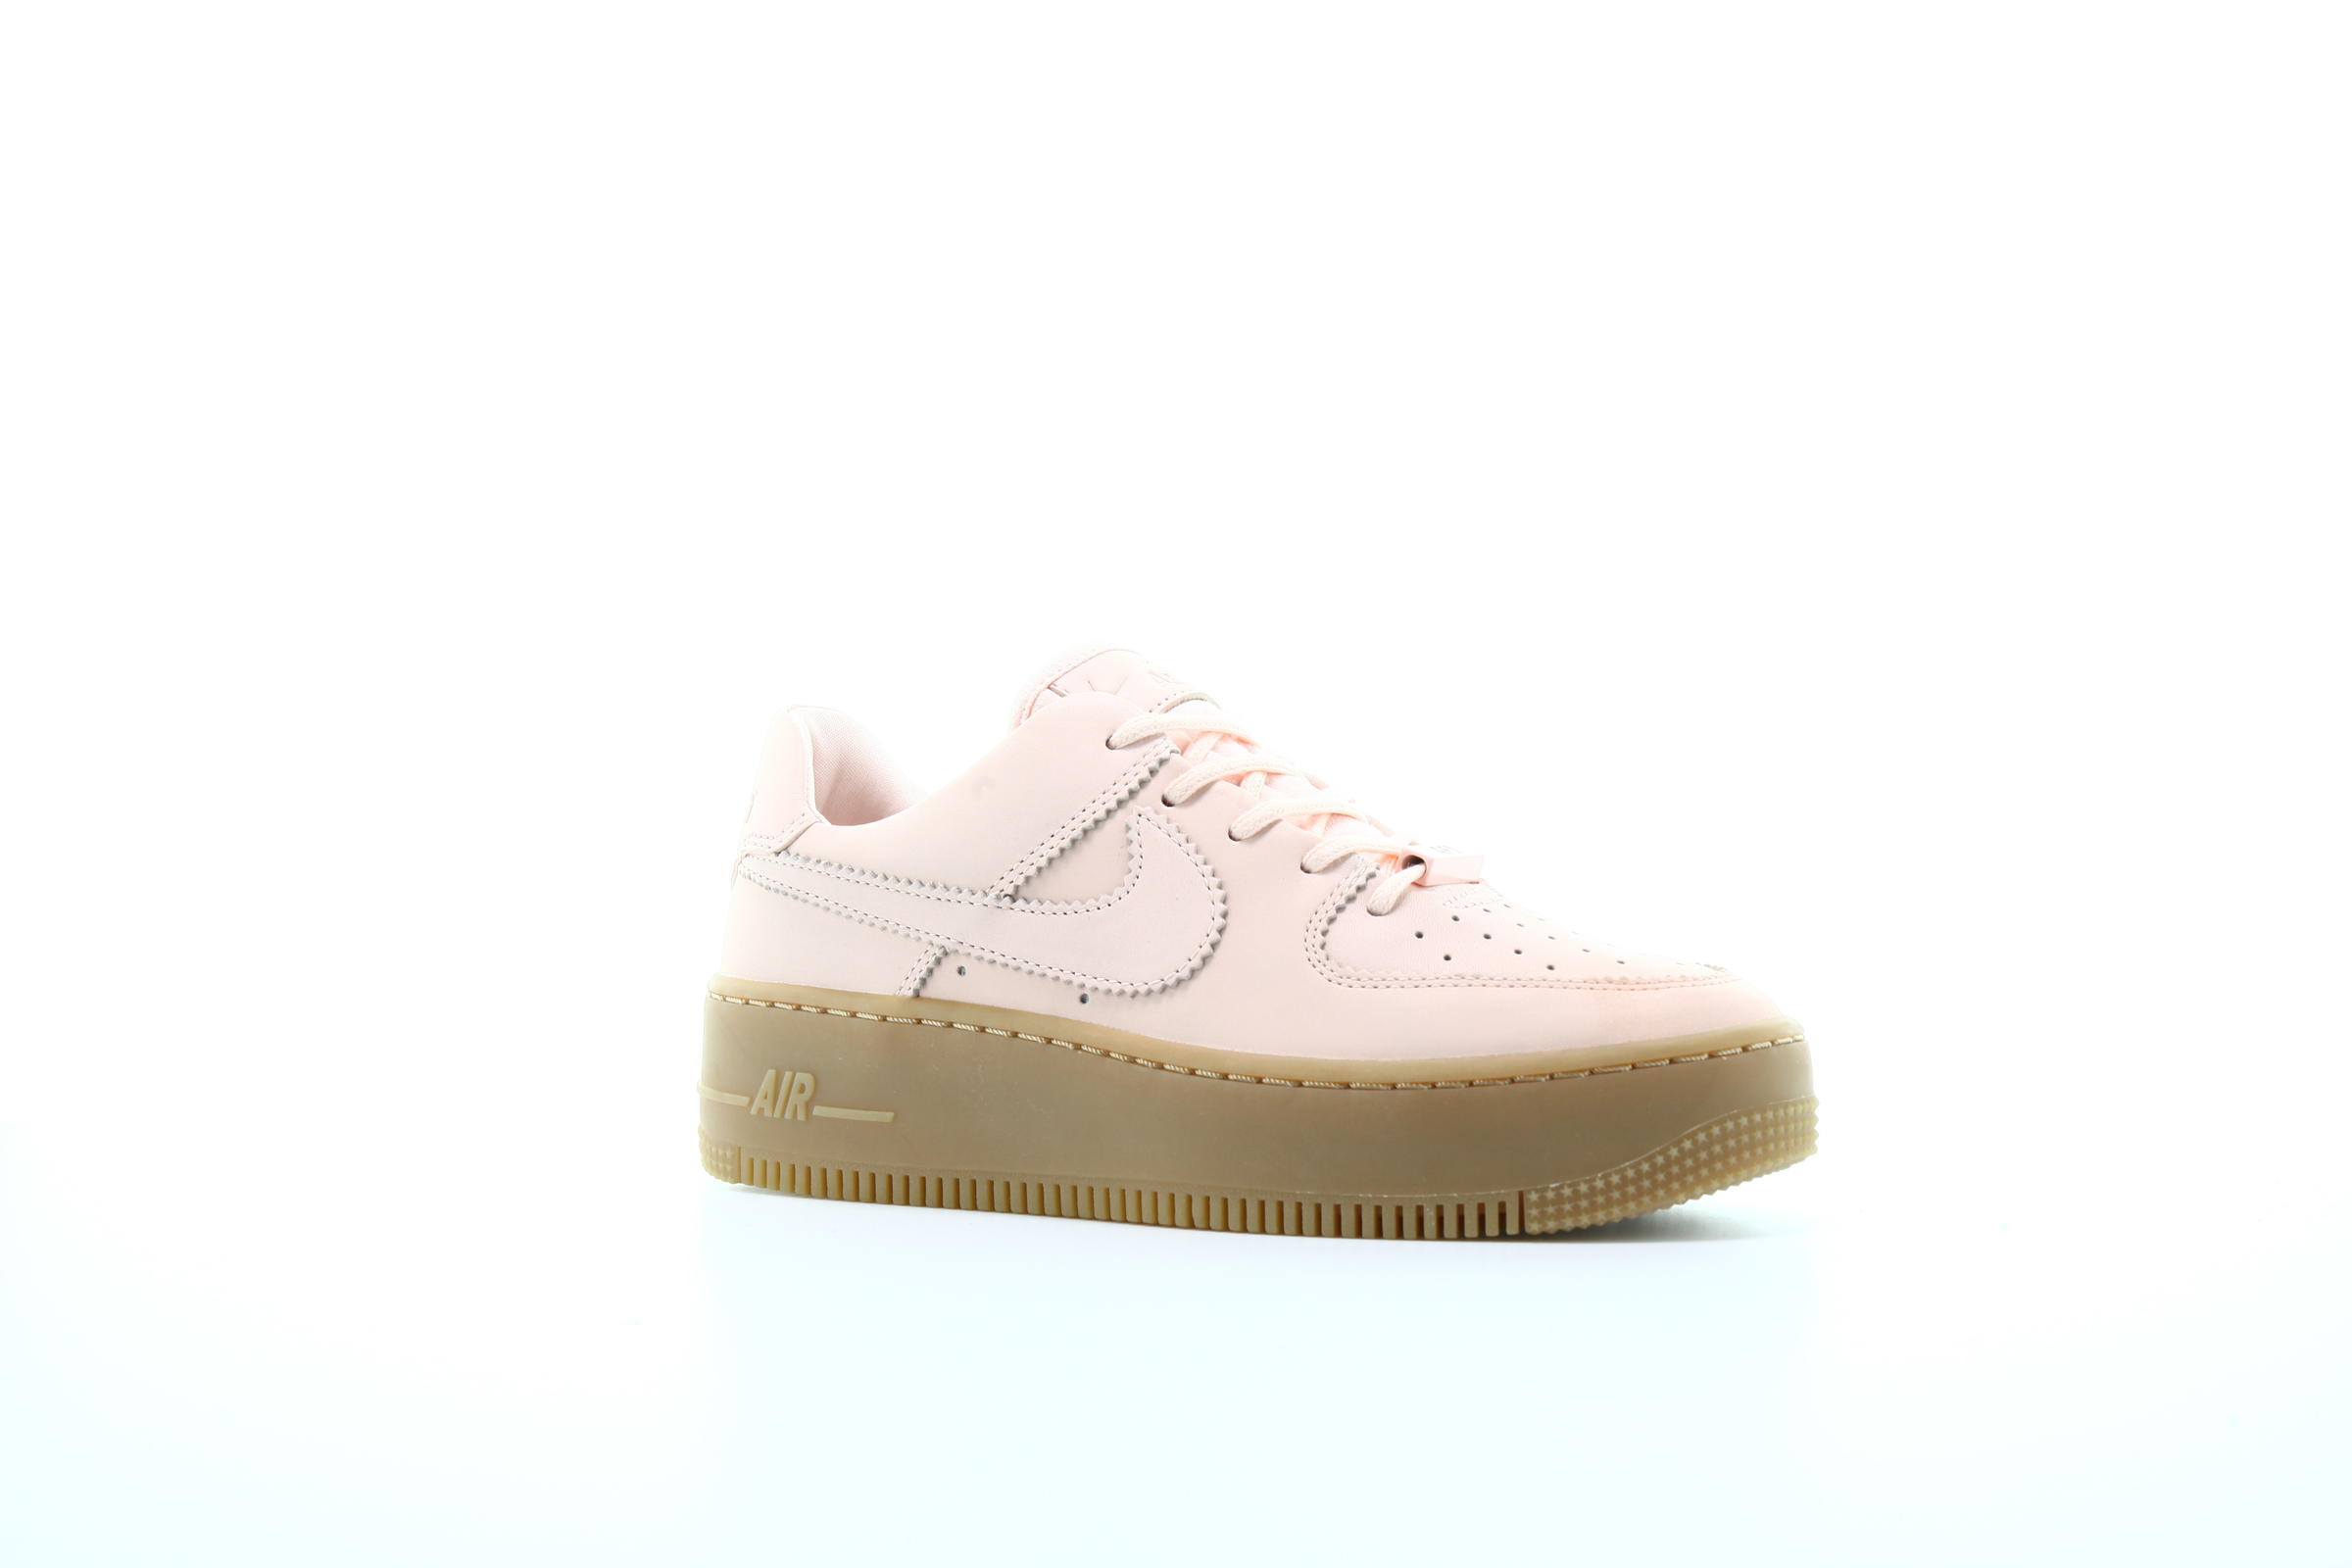 Nike WMS Air Force 1 Sage Low LX "Pale Ivory"